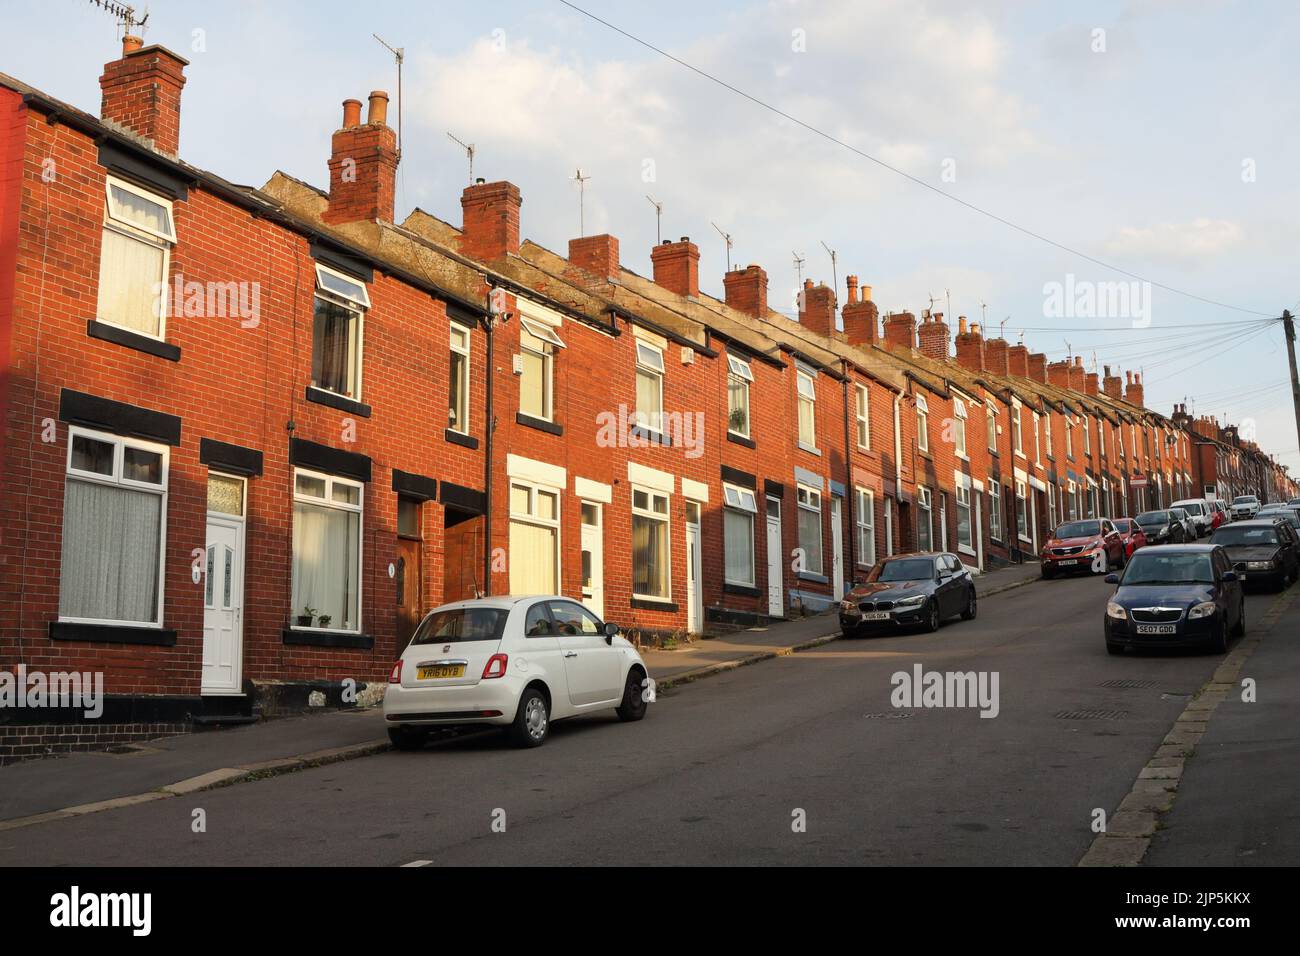 Steep Cartmell road, residential road of terraced houses, Sheffield England. Street view Stock Photo